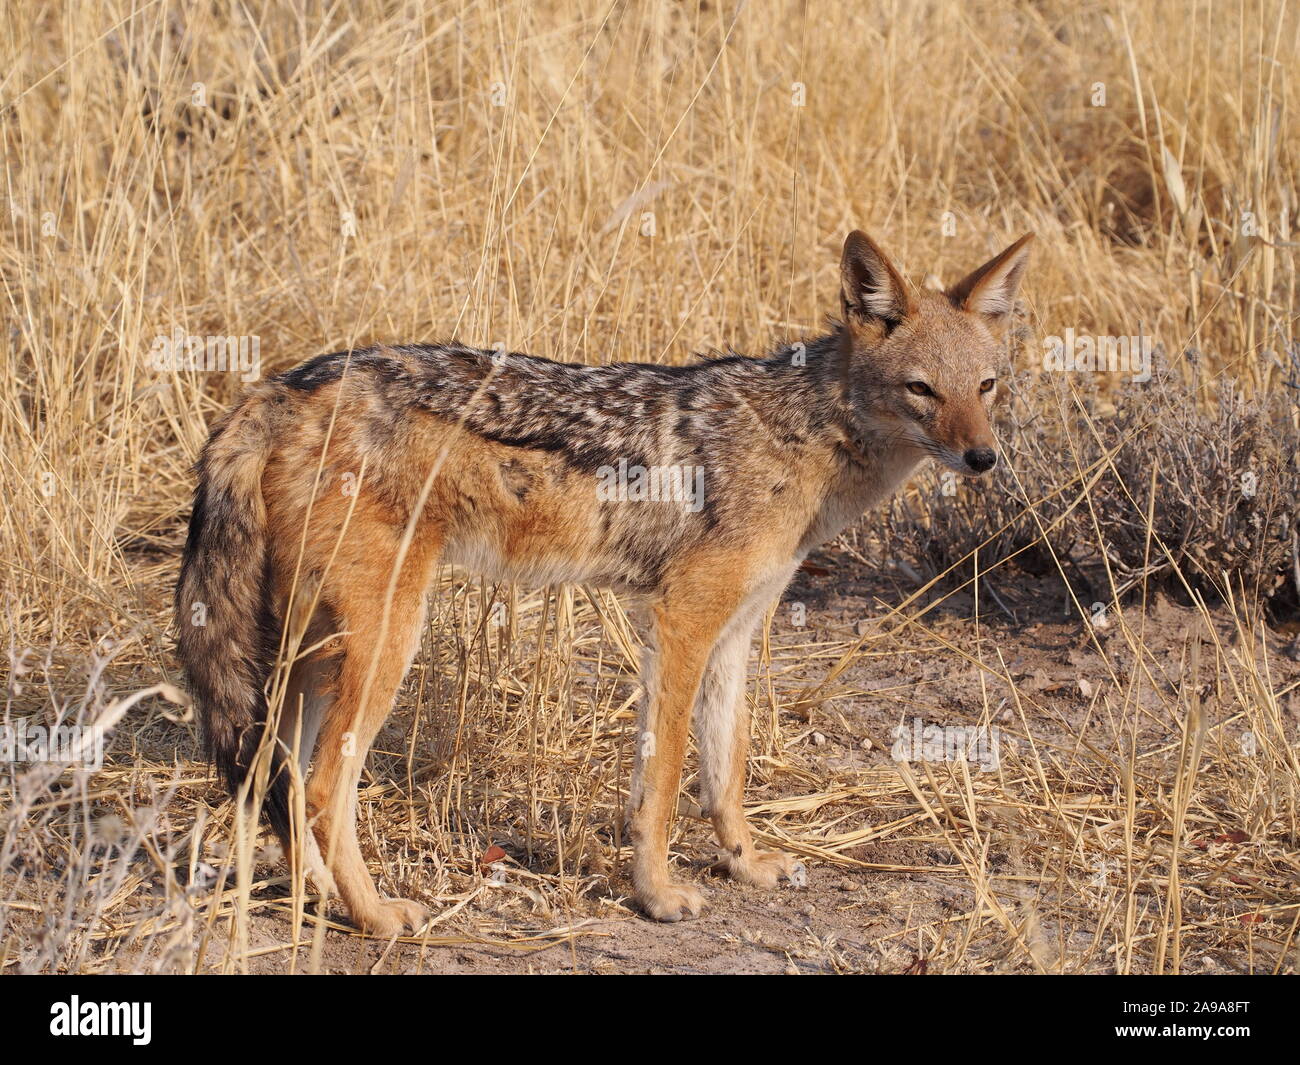 Jackal at Etosha in Namibia - side view, head partially turned towards the camera standing in front of grass shows very effective camouflage Stock Photo